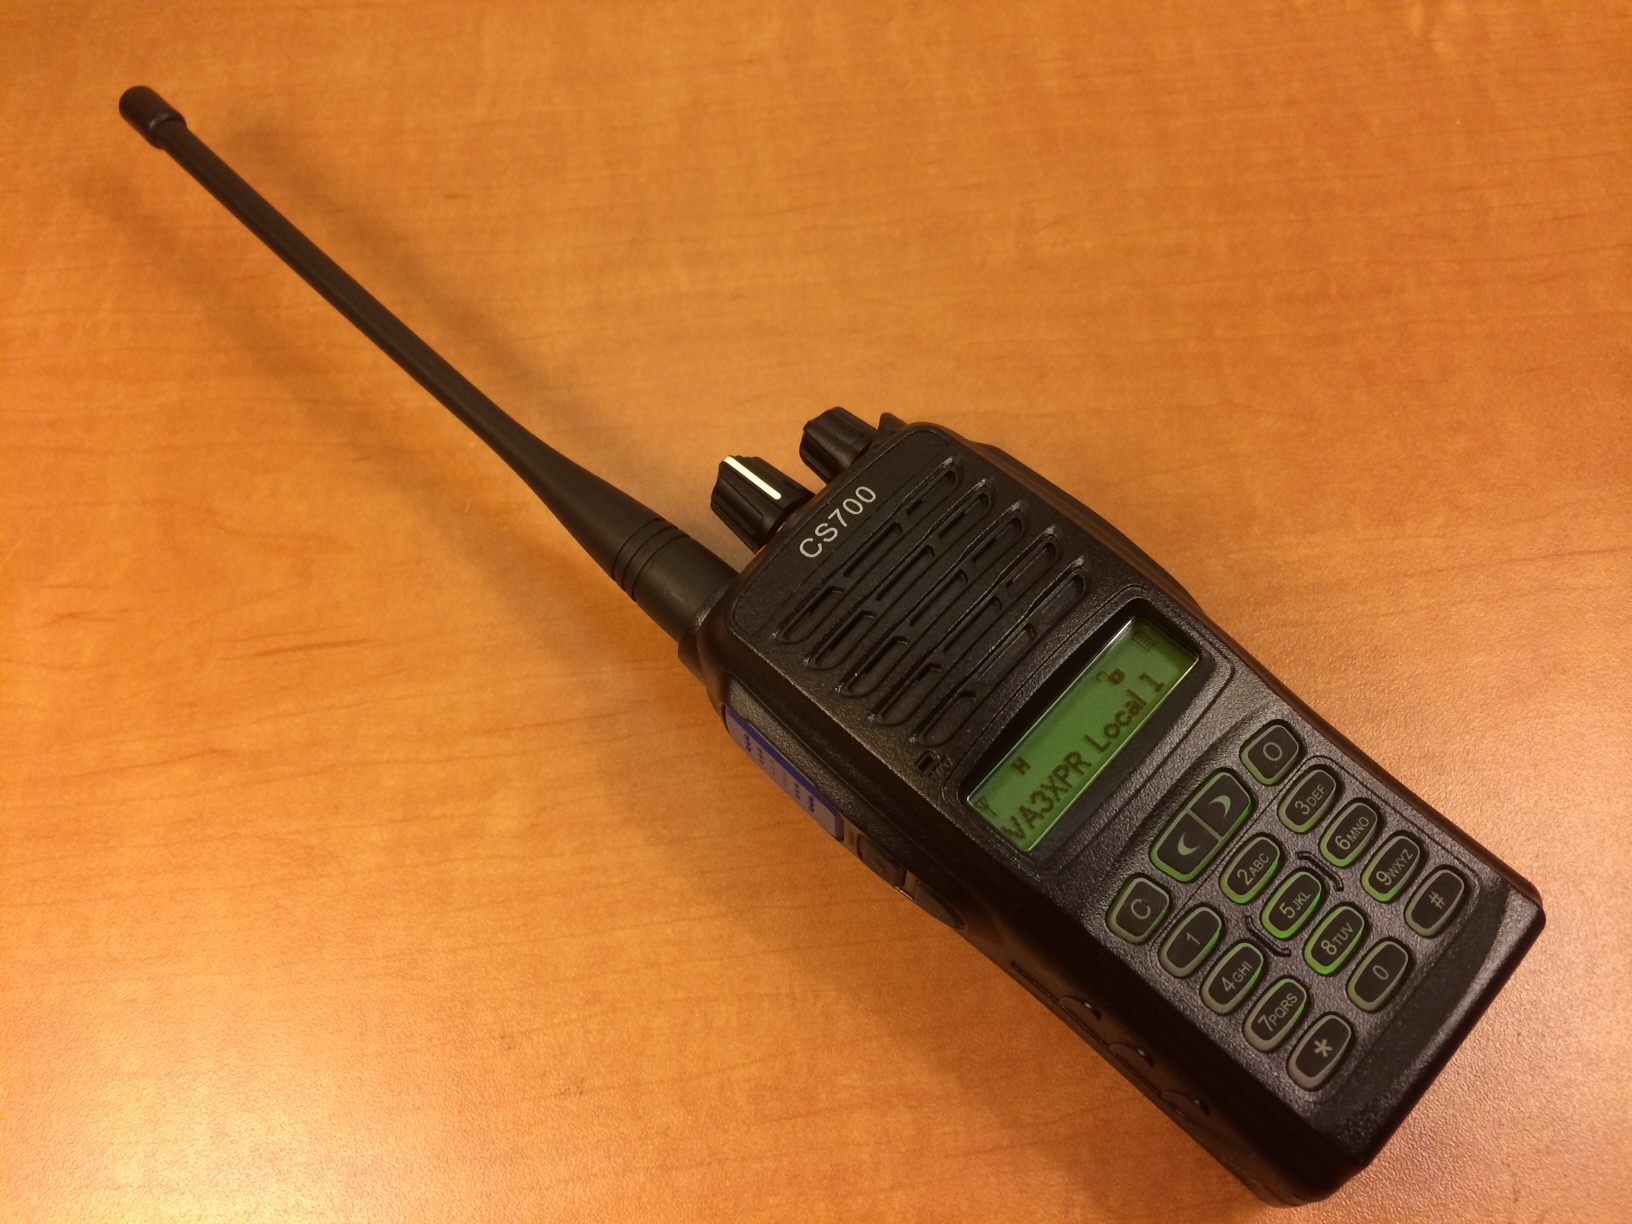 Connect Systems CS700 DMR Portable Radio Review - VA3XPR